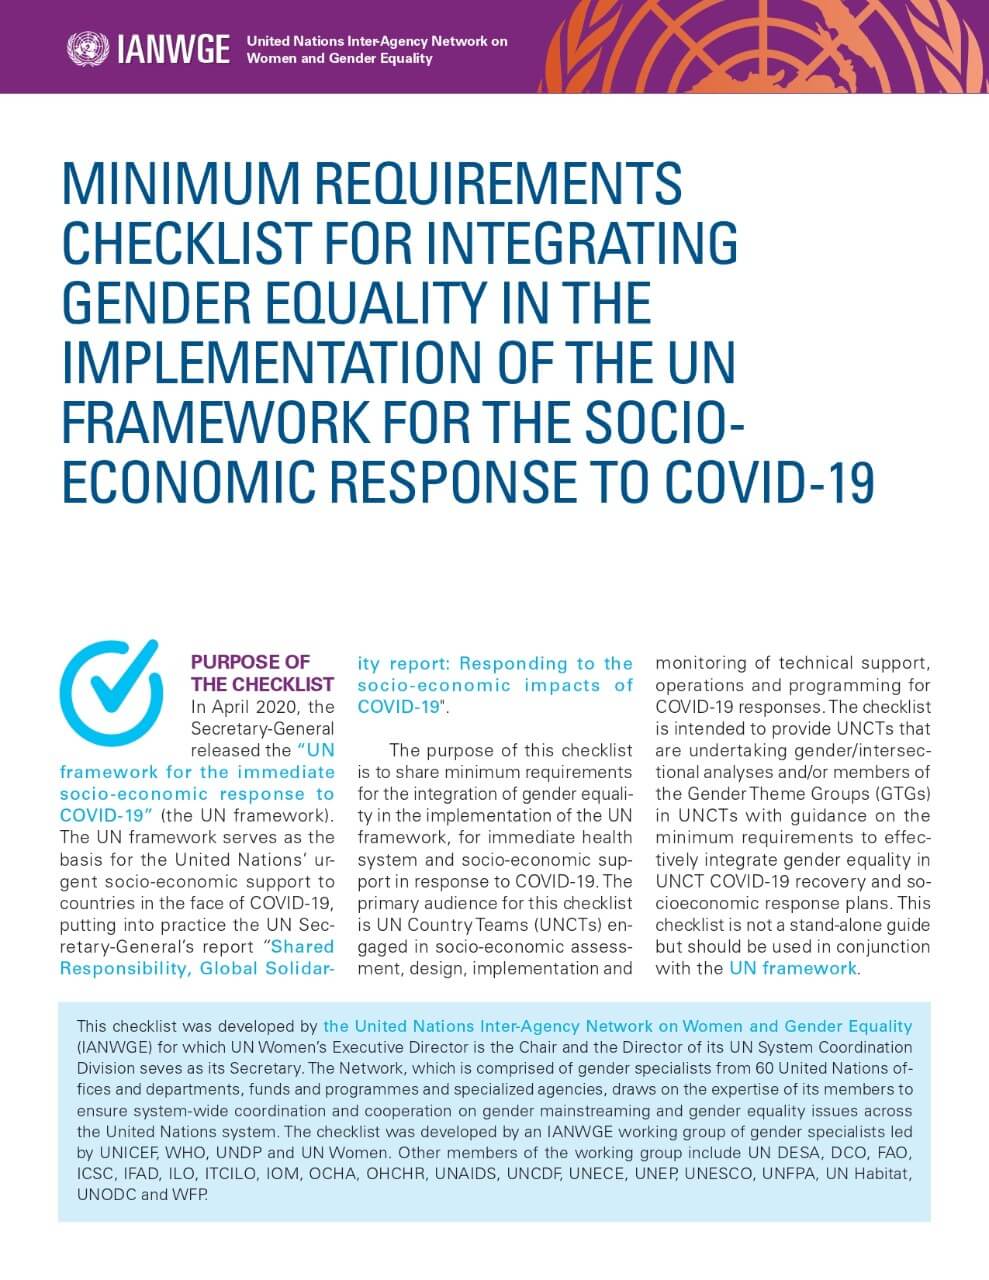 Minimum requirements checklist for integrating gender equality in the implementation of the UN Framework for the Socioeconomic Response to COVID-19